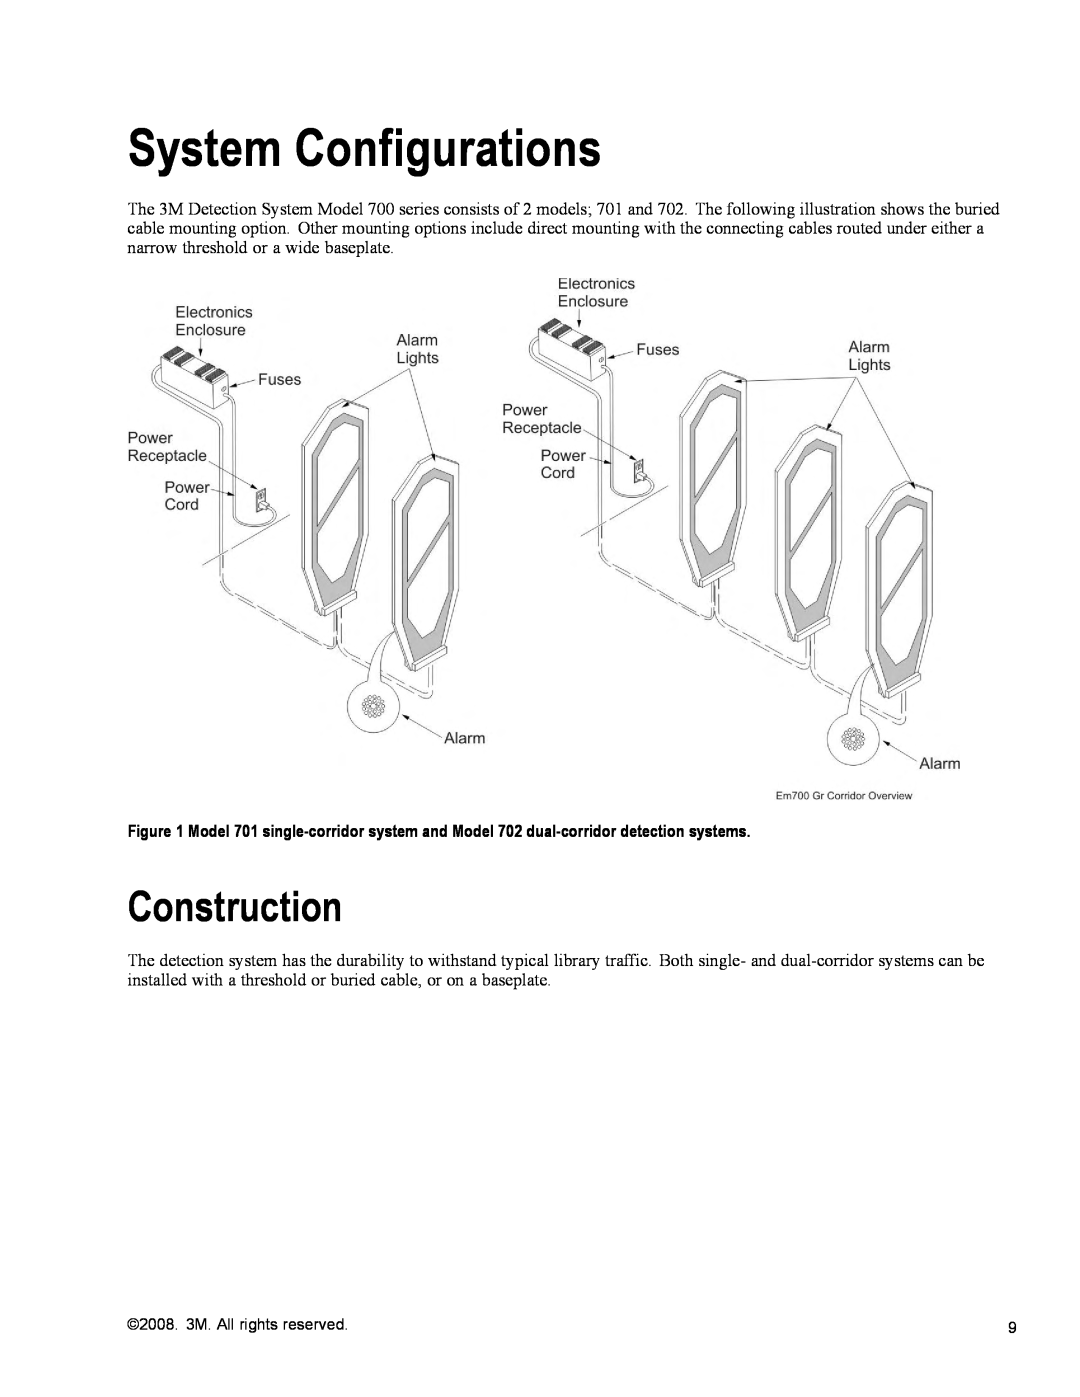 3M 700 Series owner manual System Configurations, Construction 